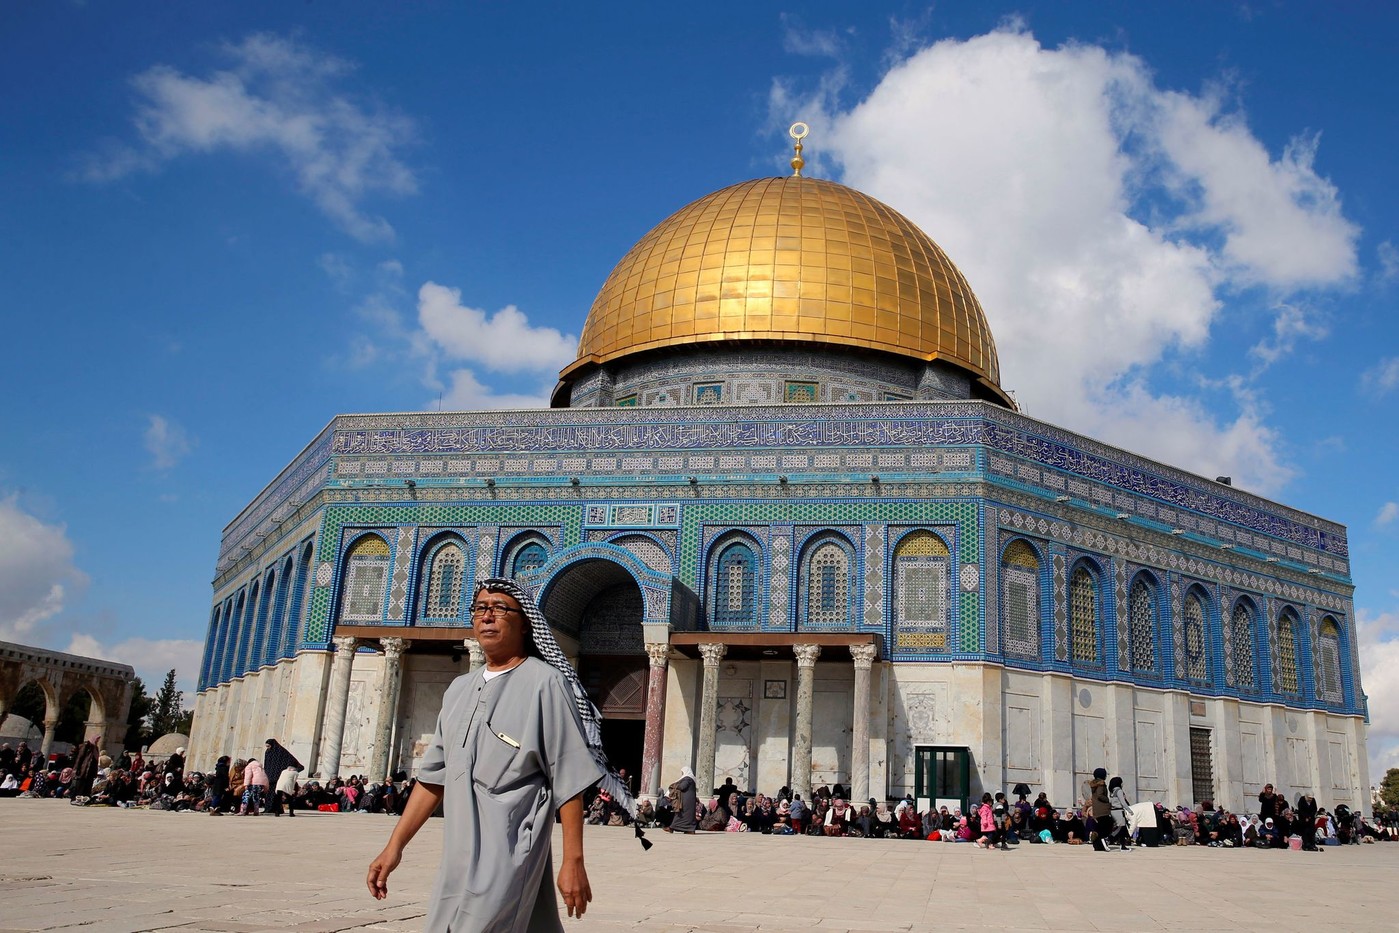 Changing Jerusalem Status will Fan the Flames of Religious, Ideological conflicts, Mohammed VI Warns